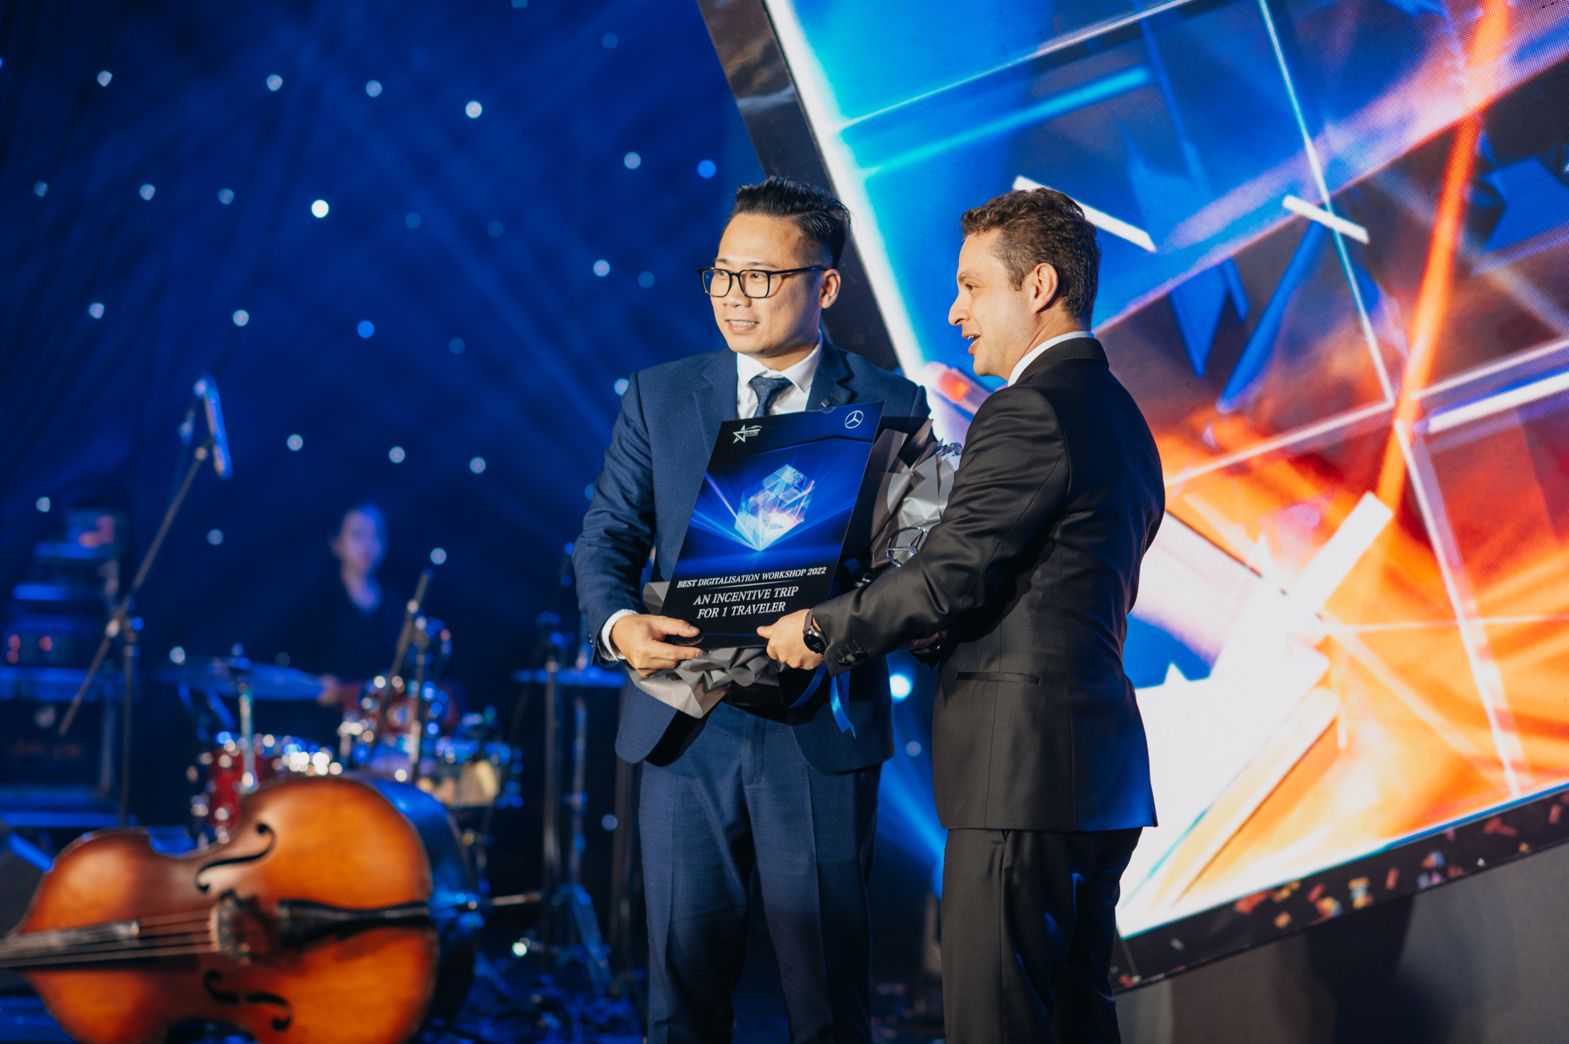 Vietnam Star Automobile recognized with numerous awards at the Mercedes-Benz Star Awards 2023.